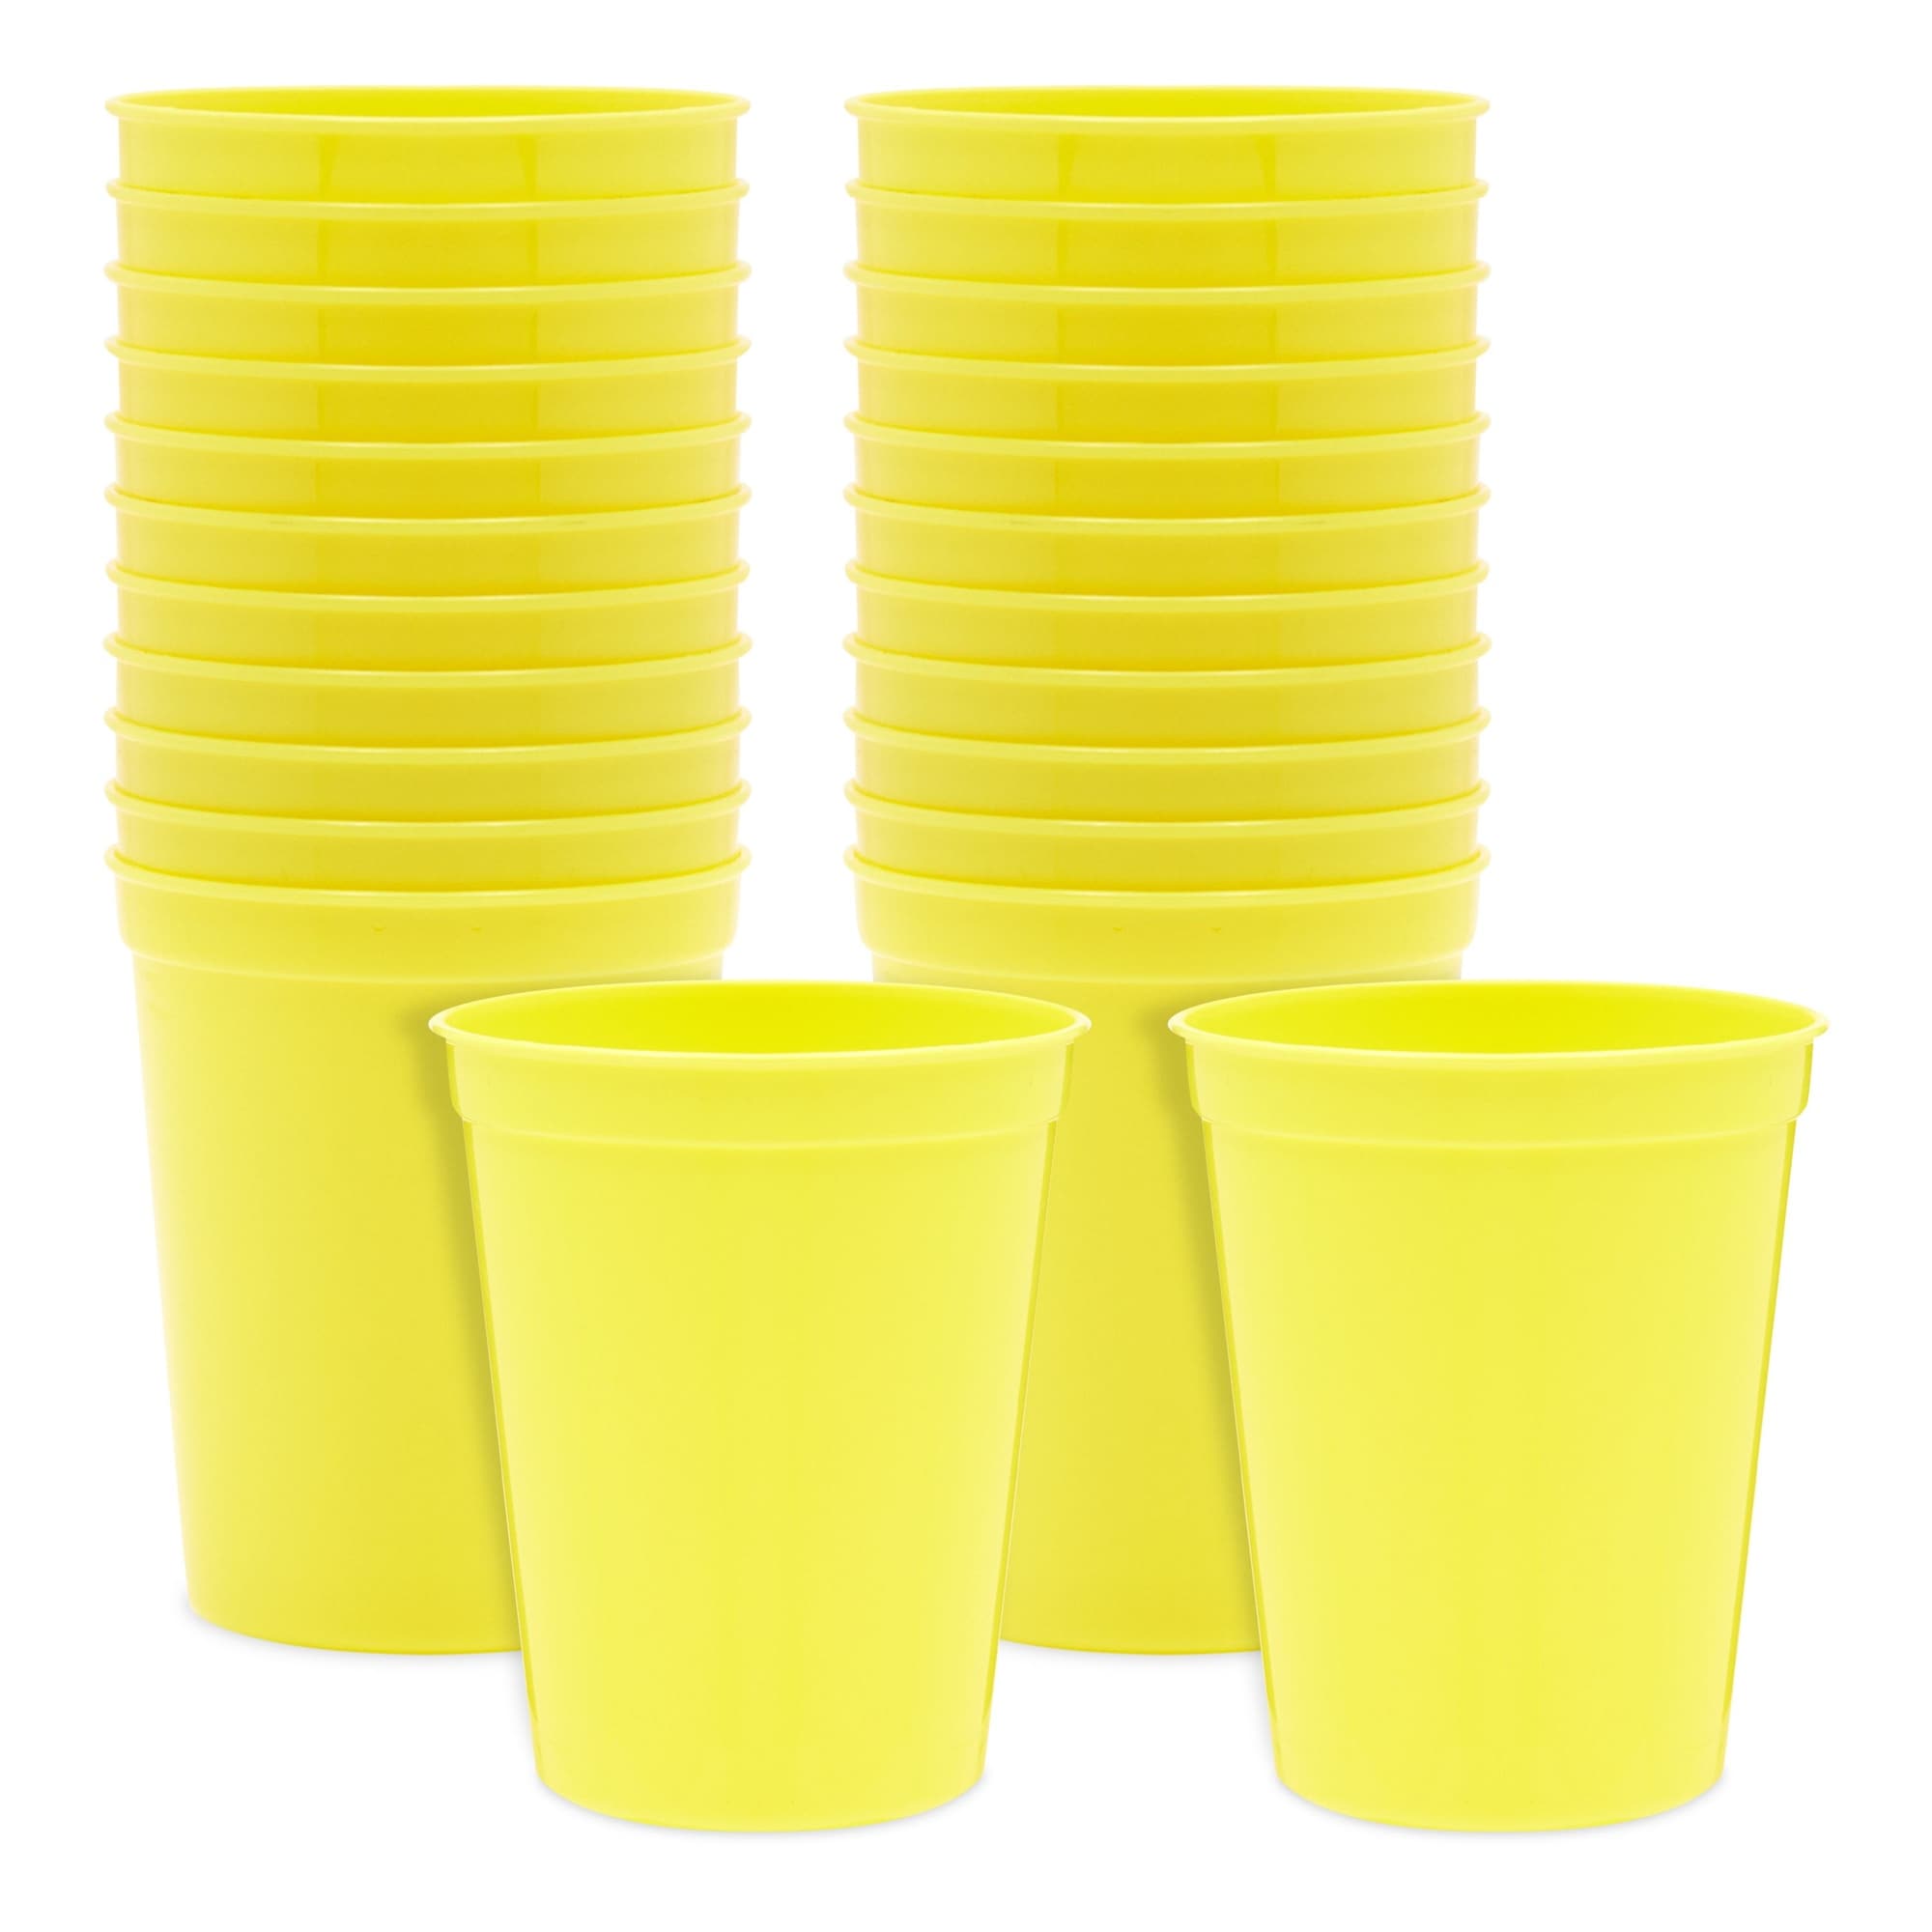 https://ak1.ostkcdn.com/images/products/is/images/direct/254987c1488ab2c4ad60551f98fbb53c7cd1ce13/16oz-Yellow-Plastic-Stadium-Cups-for-Birthday-Party%2C-Baby-Shower-%2824-Pack%29.jpg